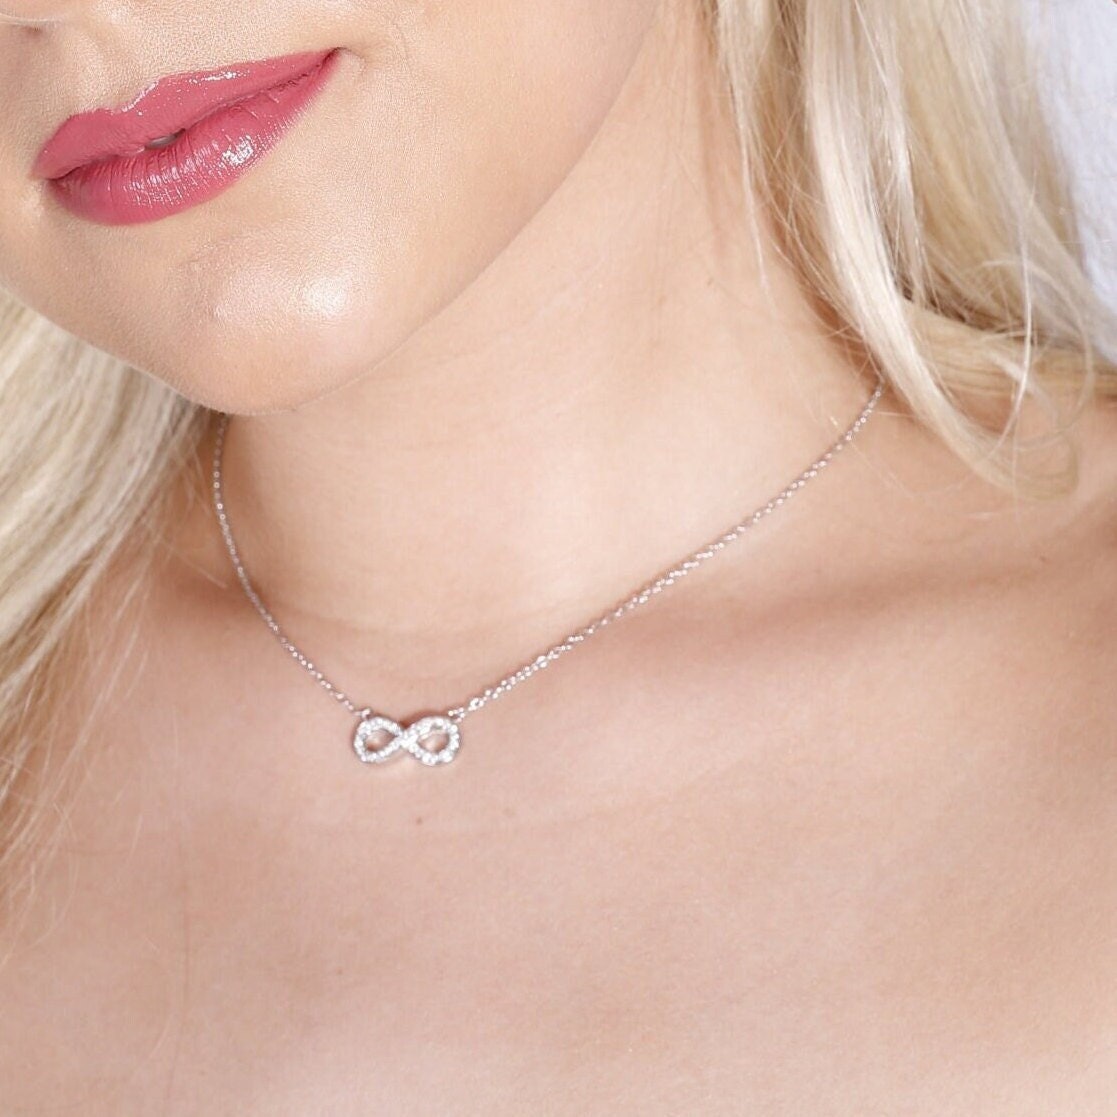 Silver Infinity Necklace, Eternity Necklace, Interlinked Necklace, Choker Necklace, Christmas Gift for her